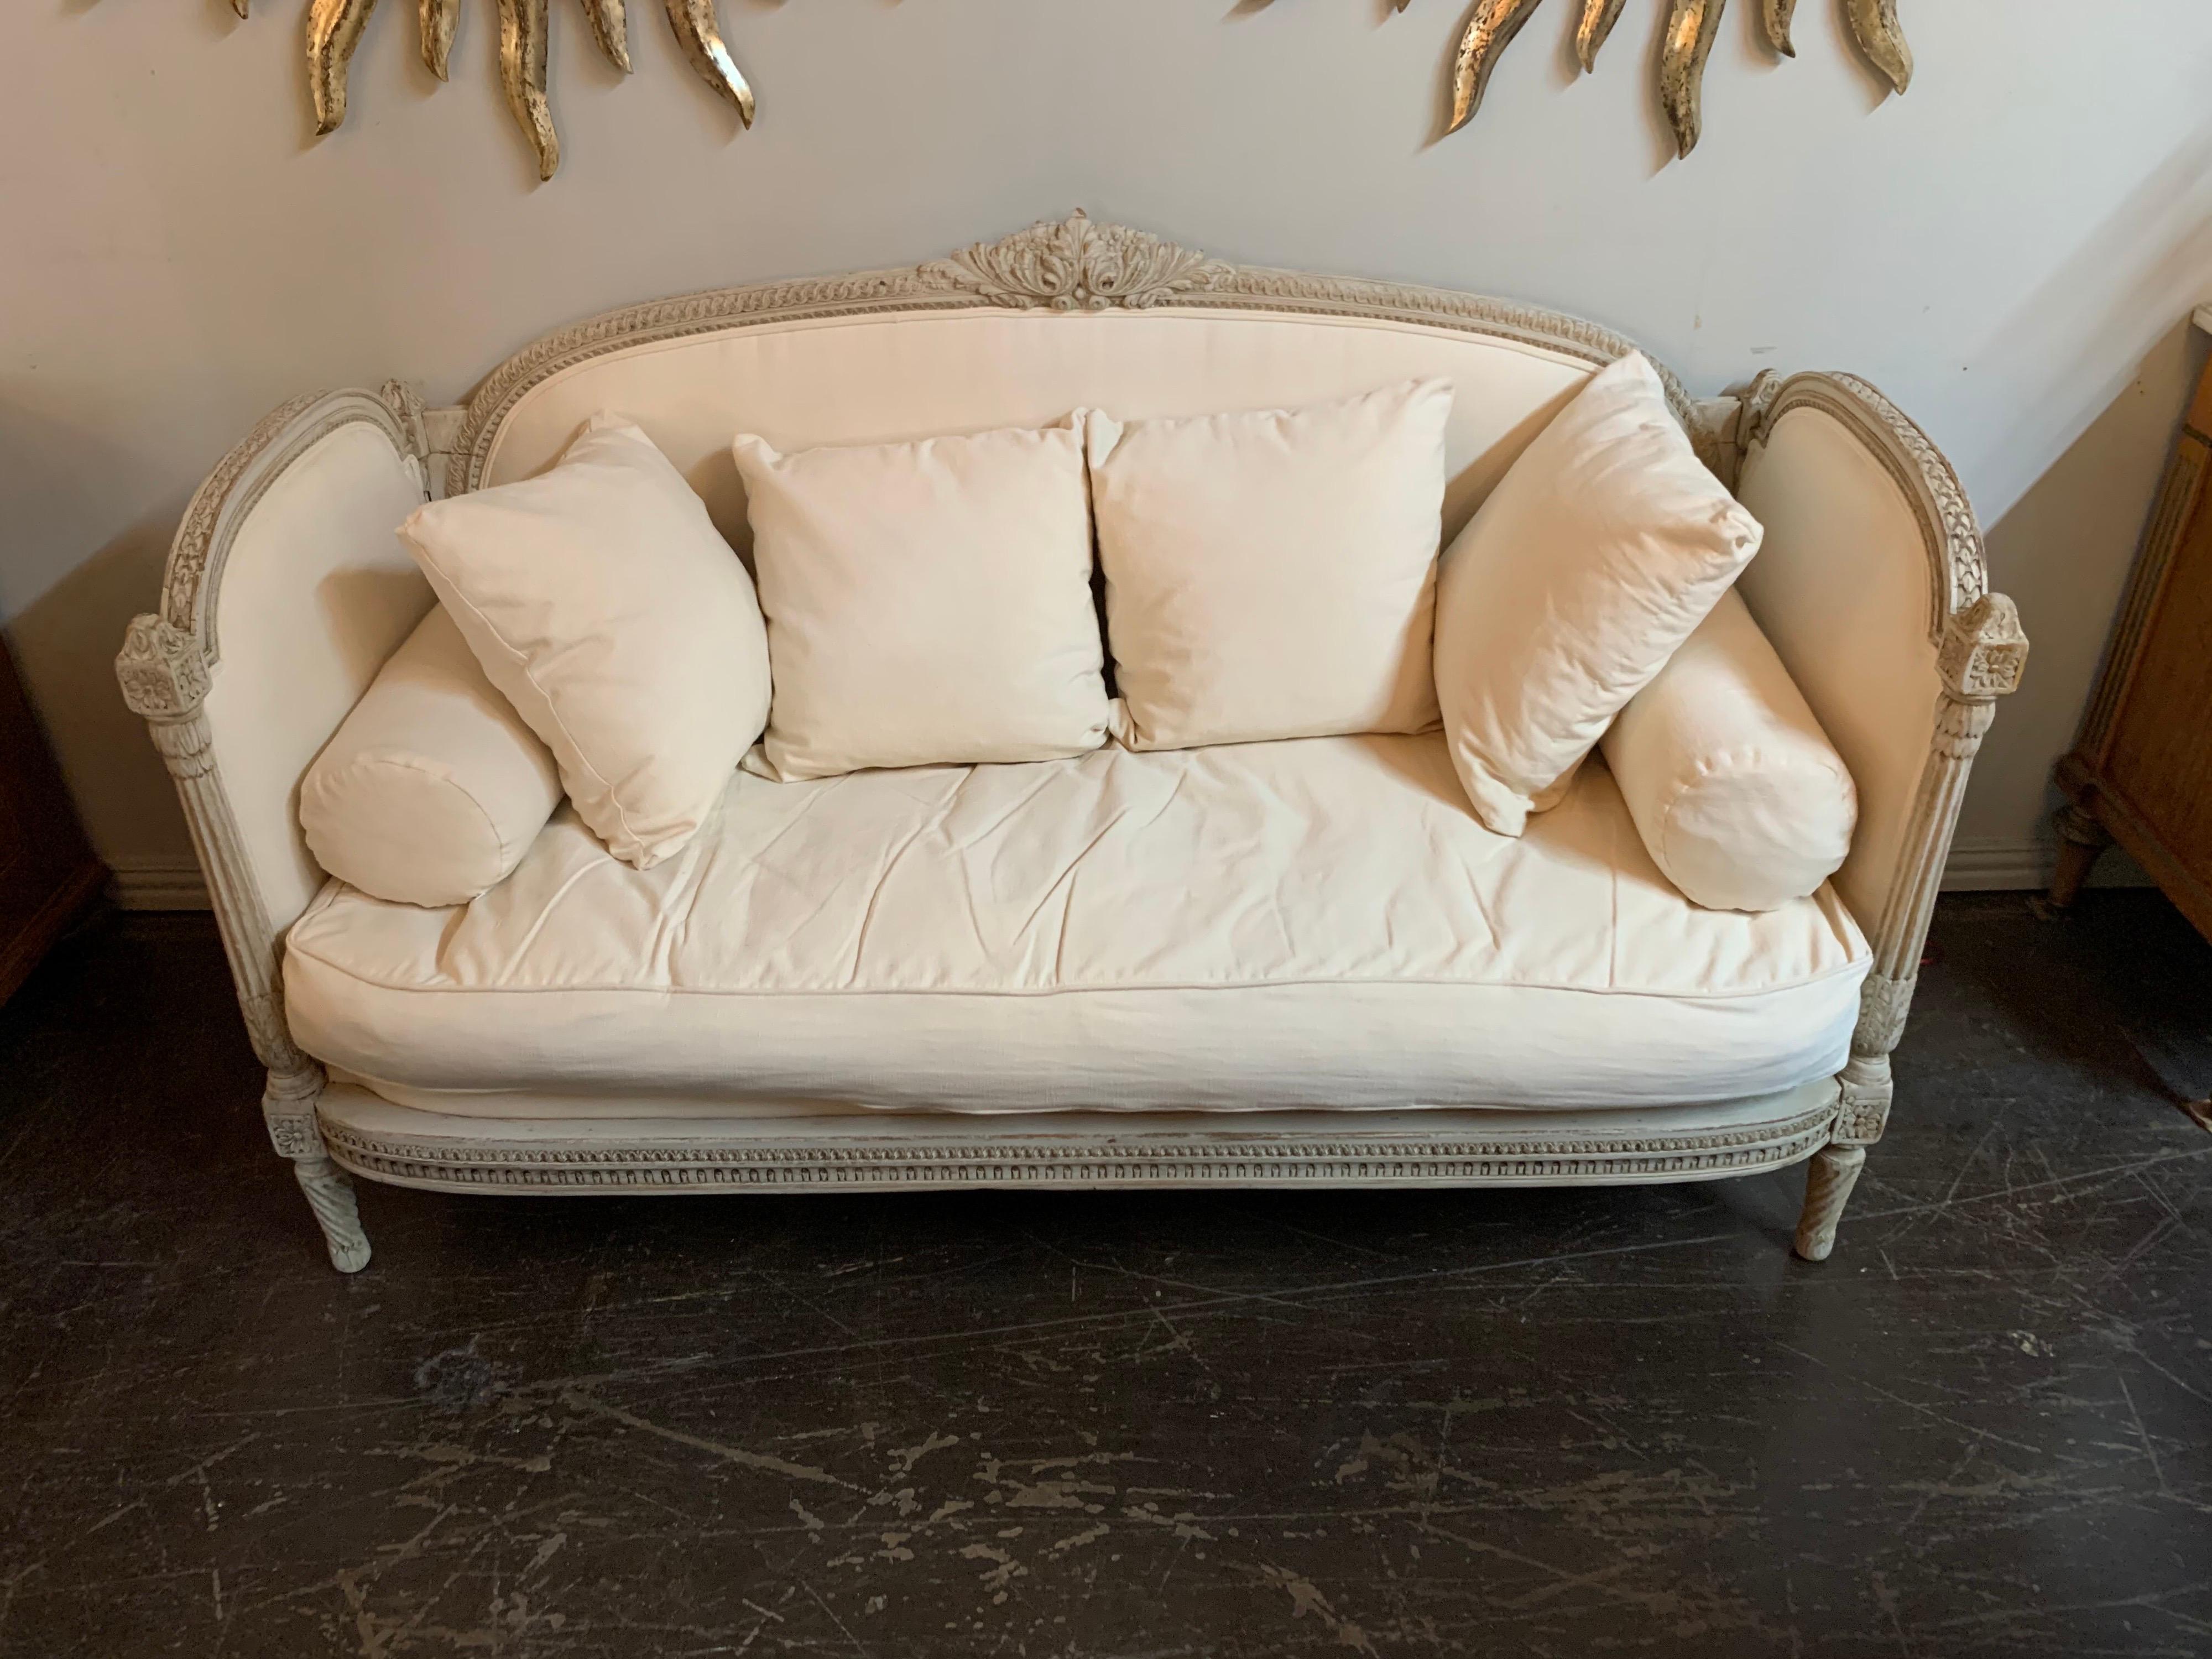 Lovely 19th century Louis XVI style carved and painted sofa. Upholstered in a beautiful creme colored linen. Exceptional carvings and so stylish. Comfortable as well! Better hurry! This will not last long.